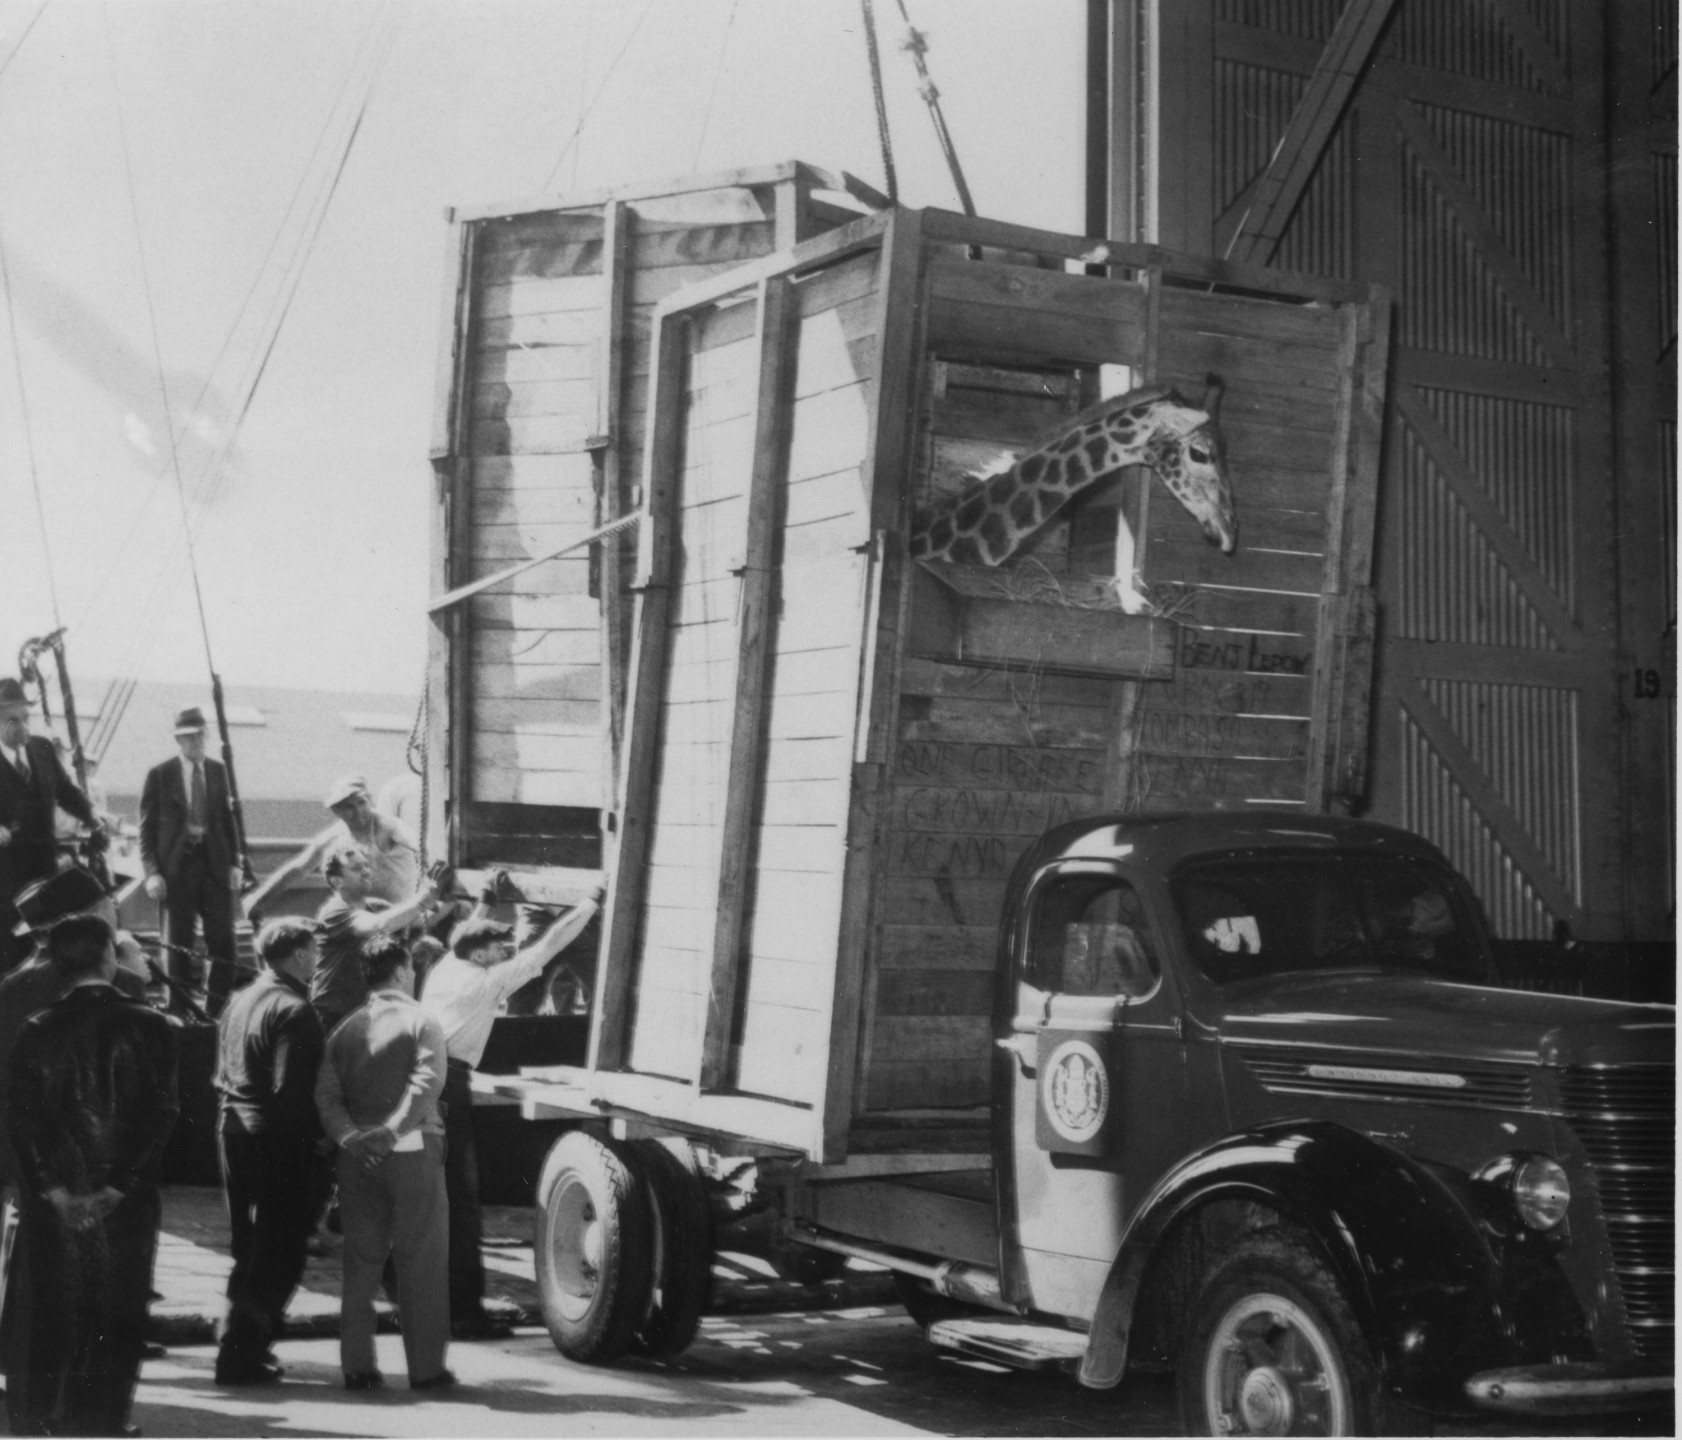 The crates holding giraffes Lofty and Patches are loaded onto the truck from the ship in New York, 1938.